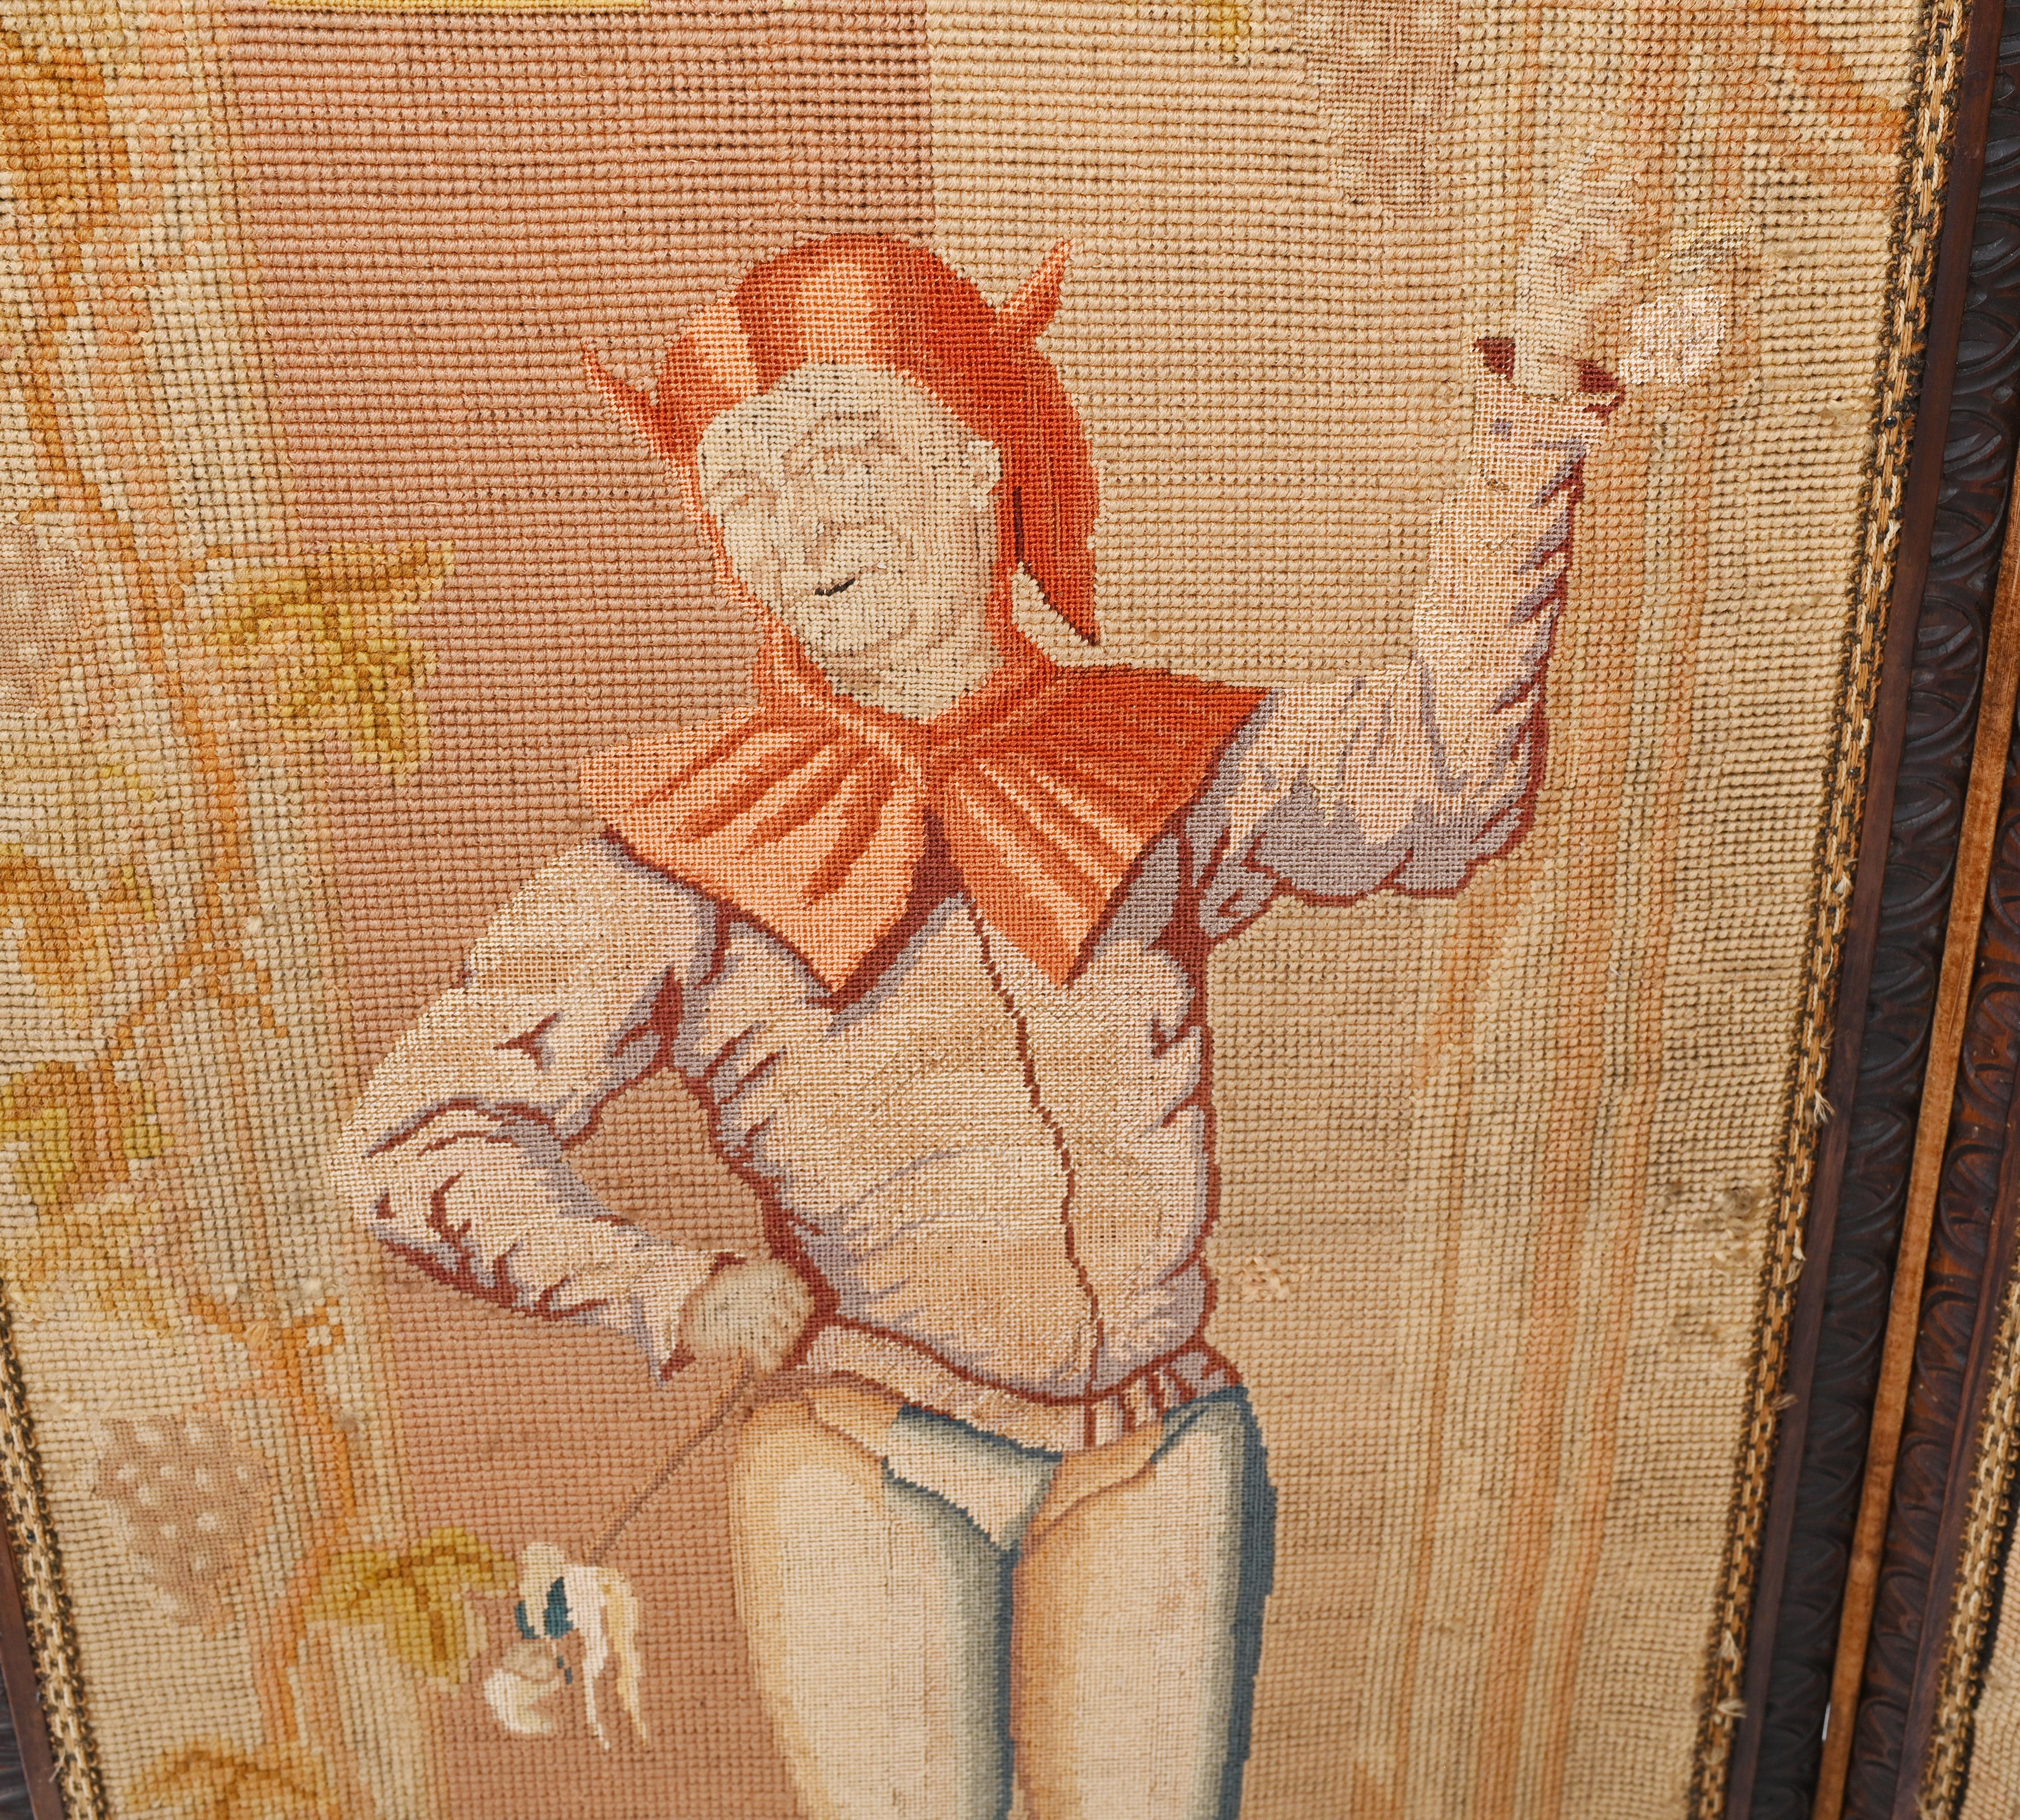 On trend antique French tapestry screen
Features four panels with a distinctive figure
Believed to be a courtly scene, one panel features a jester
This would elevate any room giving it a distintive look
The workmanship is superb, very